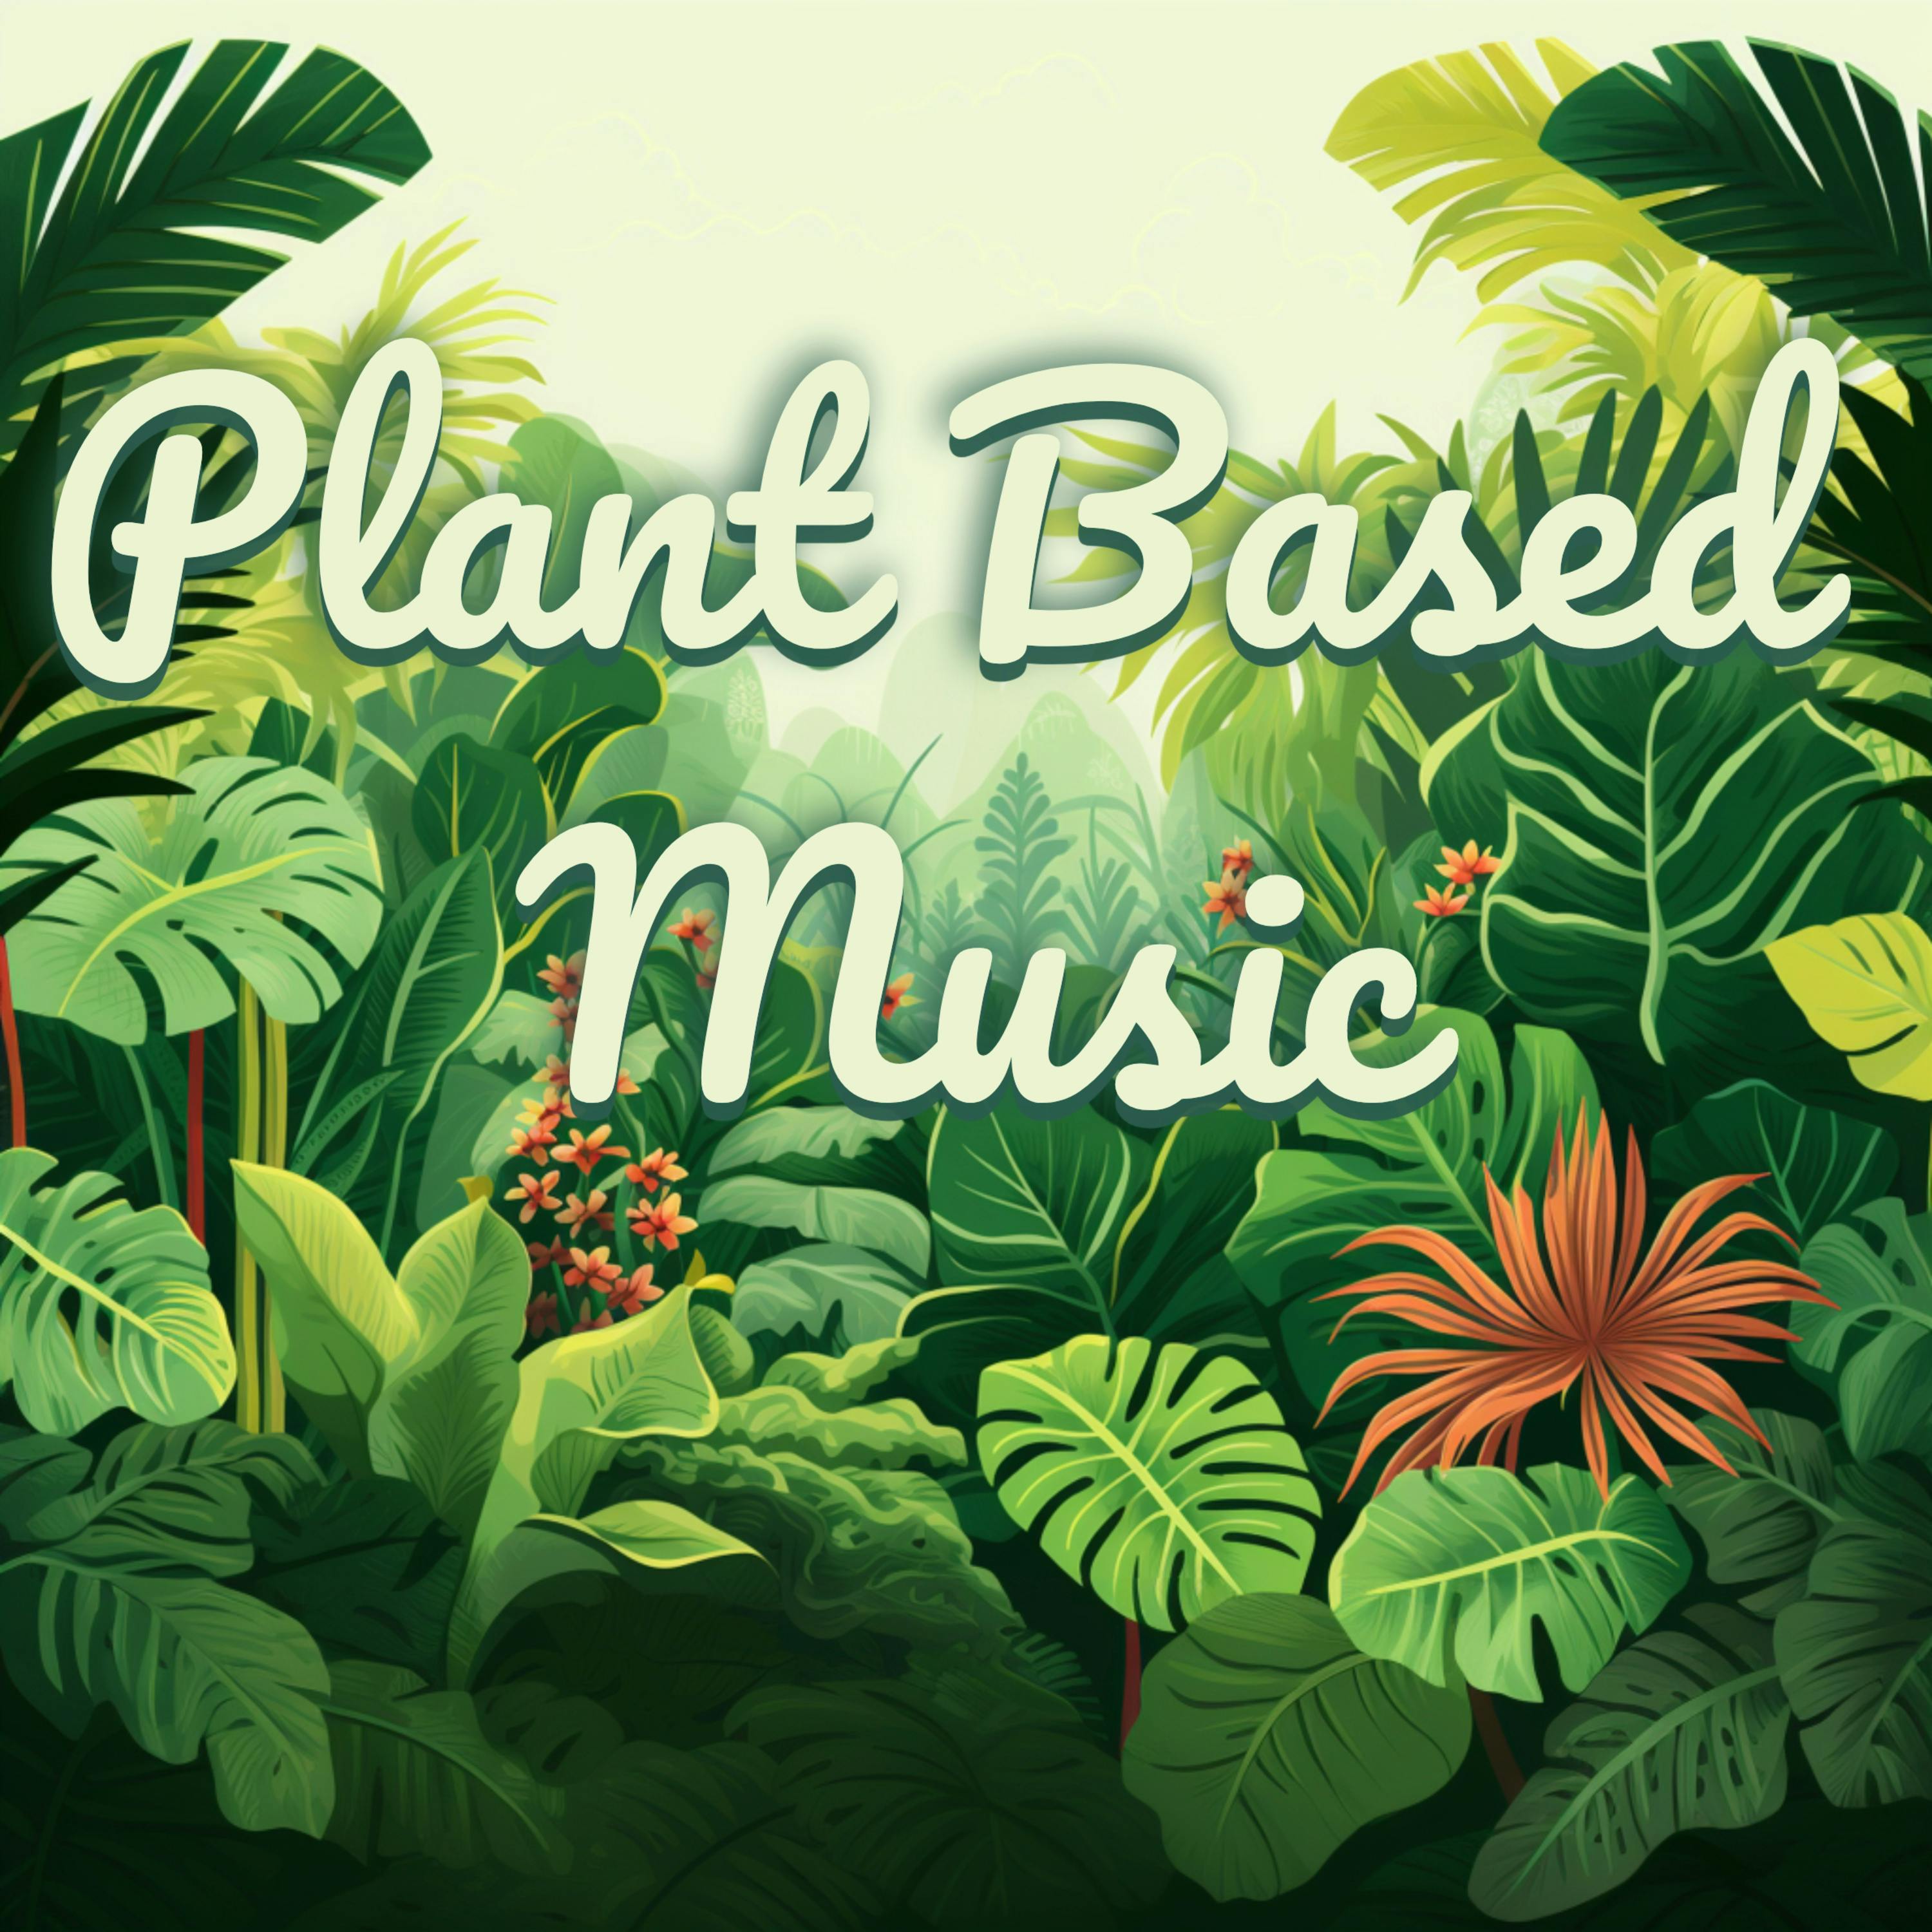 New Podcast Announcement - (Relaxing Plant-Based Music)